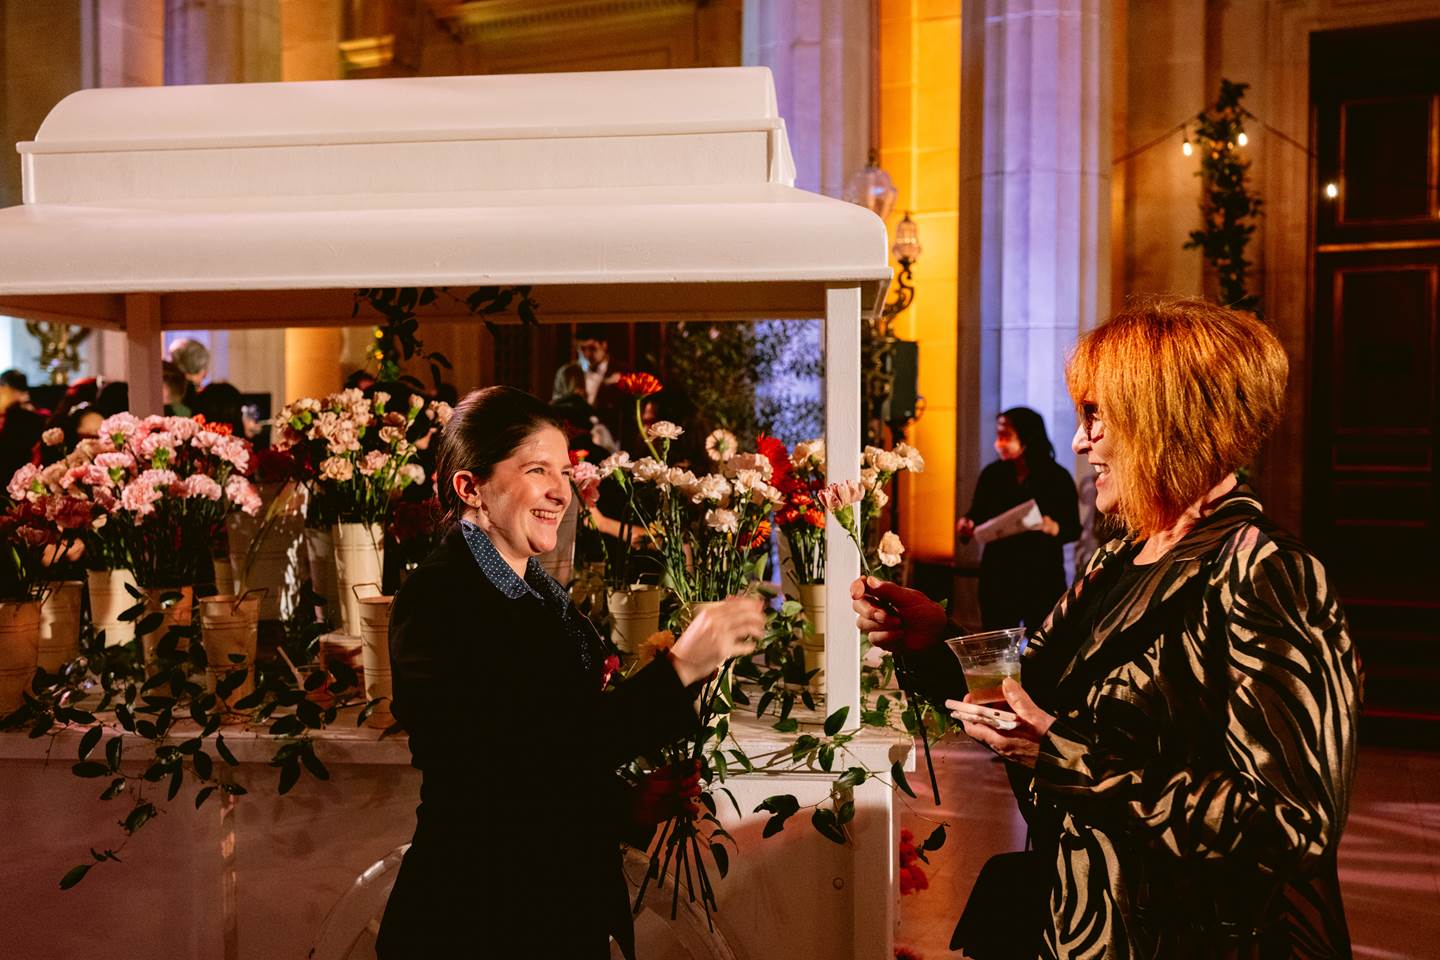 Opera volunteer handing out flowers to guests